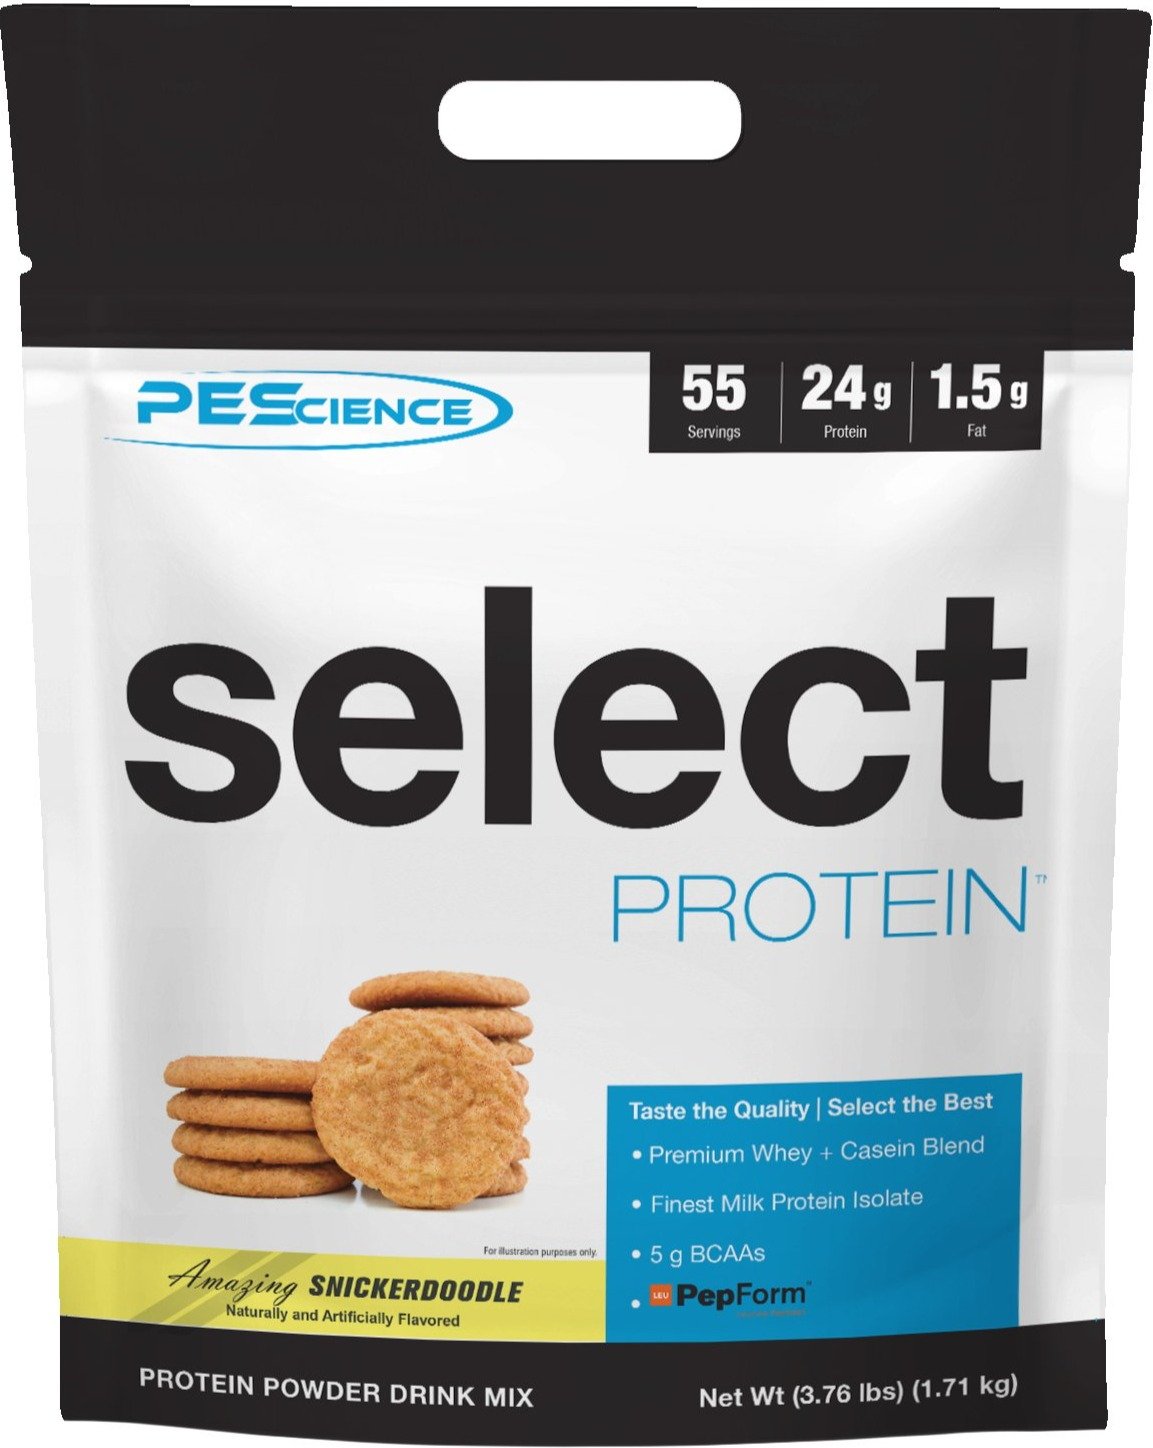 PEScience Select Protein Snickerdoodle, 55 Servings, SNS Health, Sports Nutrition